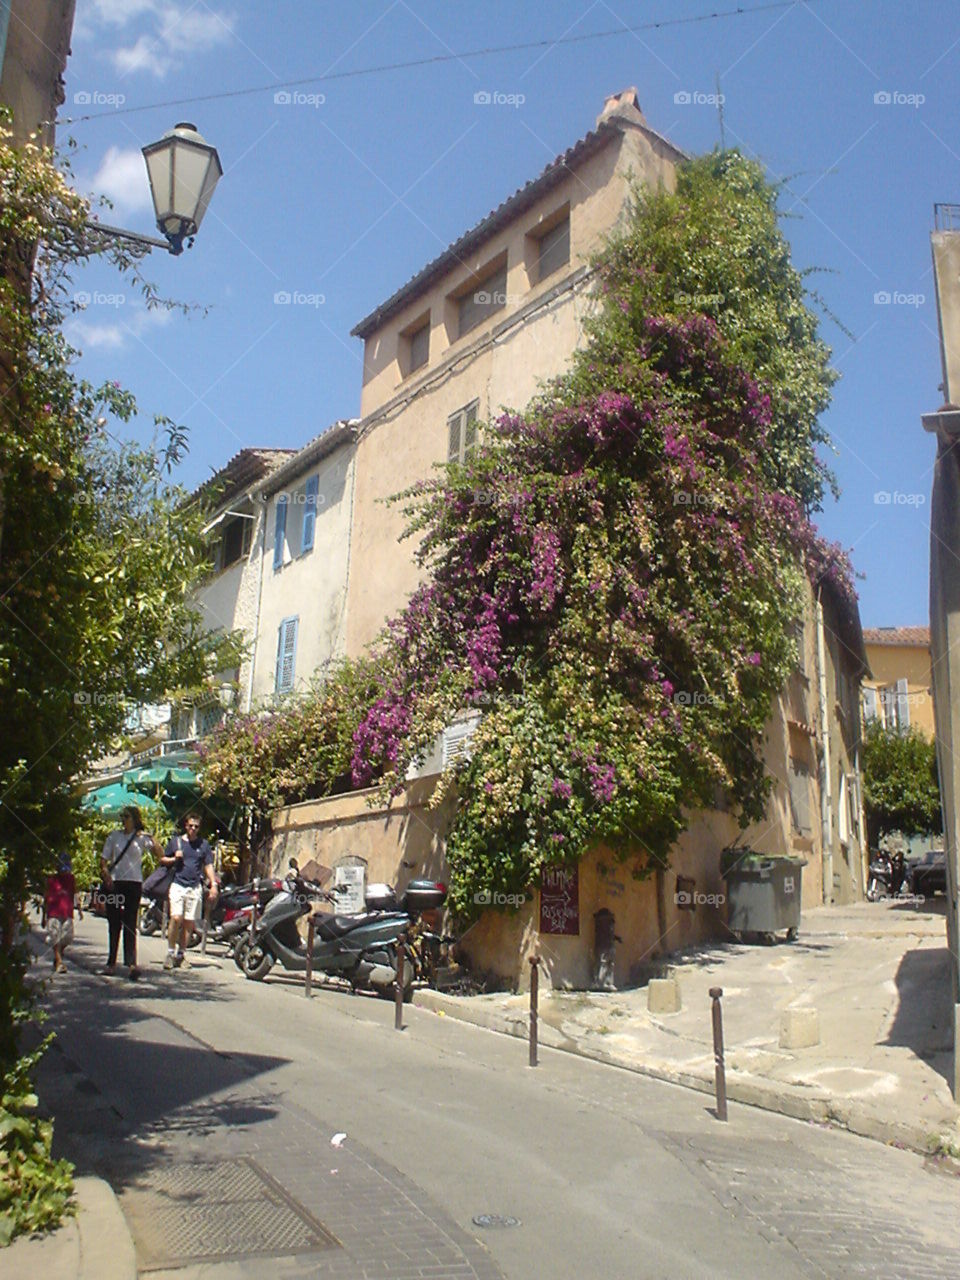 Nature becoming one with architecture. Tiny Mediterranean streets, beautiful blue skies, warm summer sea breeze.